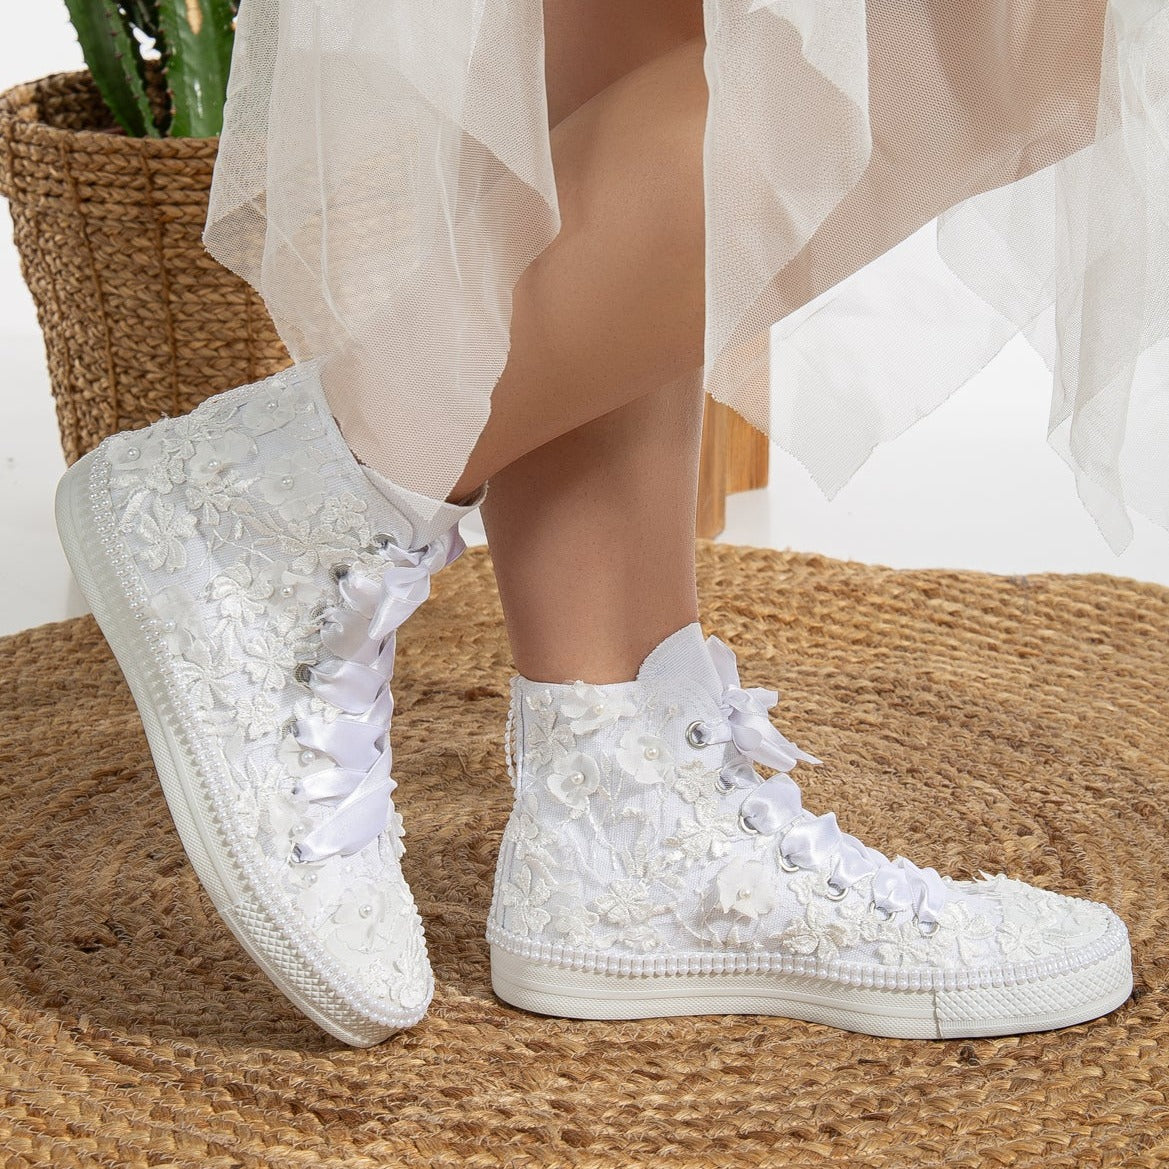 converse, white lace sneakers, lace-up white sneakers, white lace tennis shoes, lace detailed white sneakers, white lace casual shoes, white lace running shoes, women's white lace sneakers, white lace trainers, white lace slip-on sneakers, white lace fashion sneakers